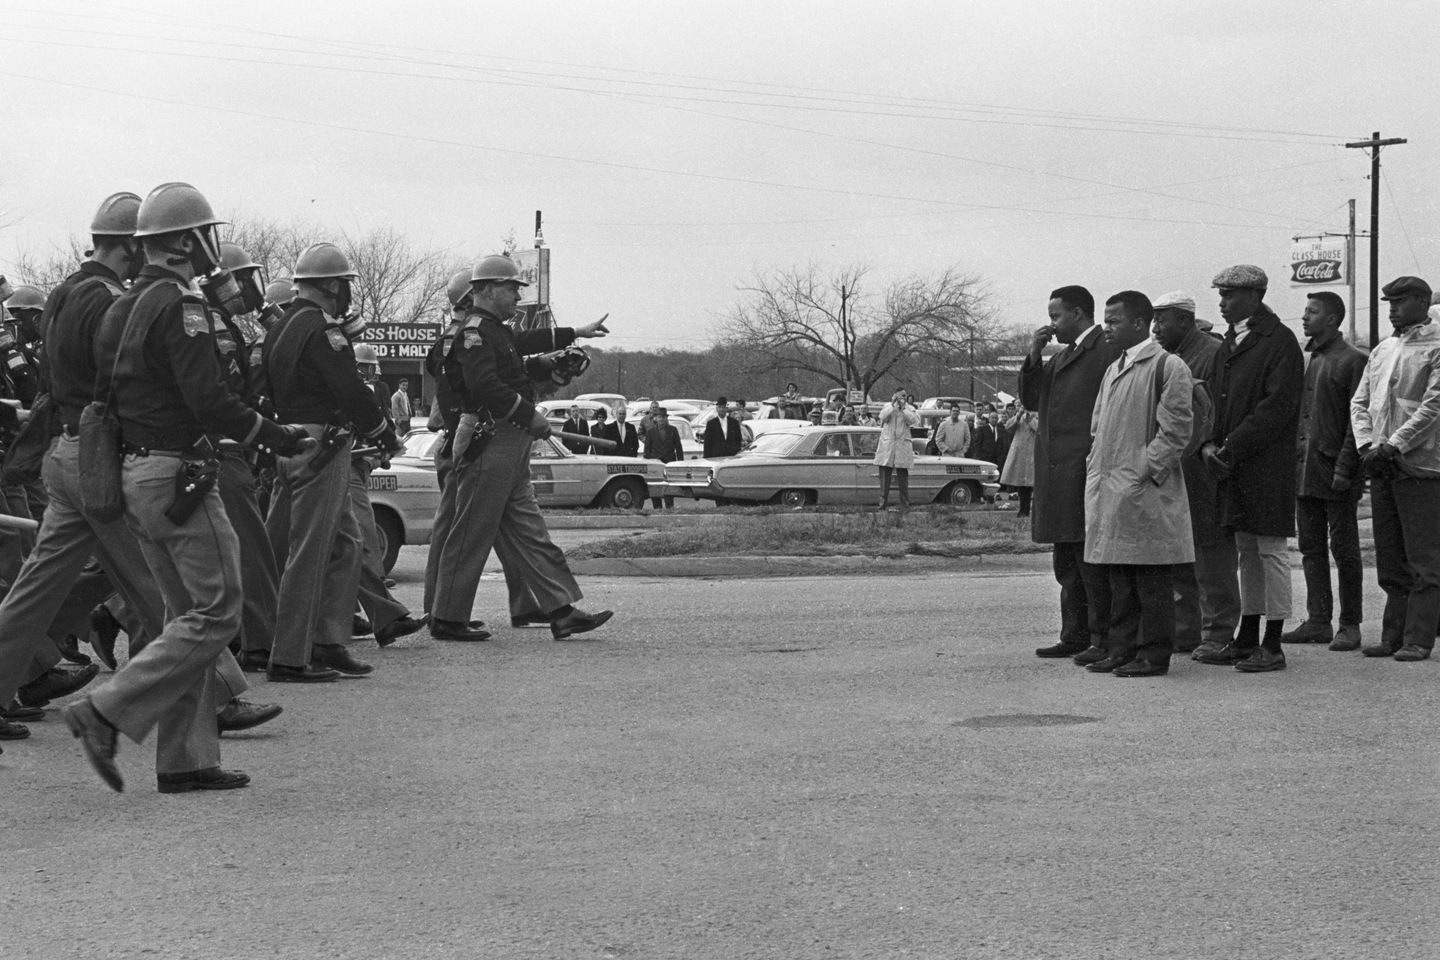 John Lewis, in the light-colored raincoat, with other protesters facing Alabama state troopers on Bloody Sunday, March 7, 1965, in Selma, Ala.